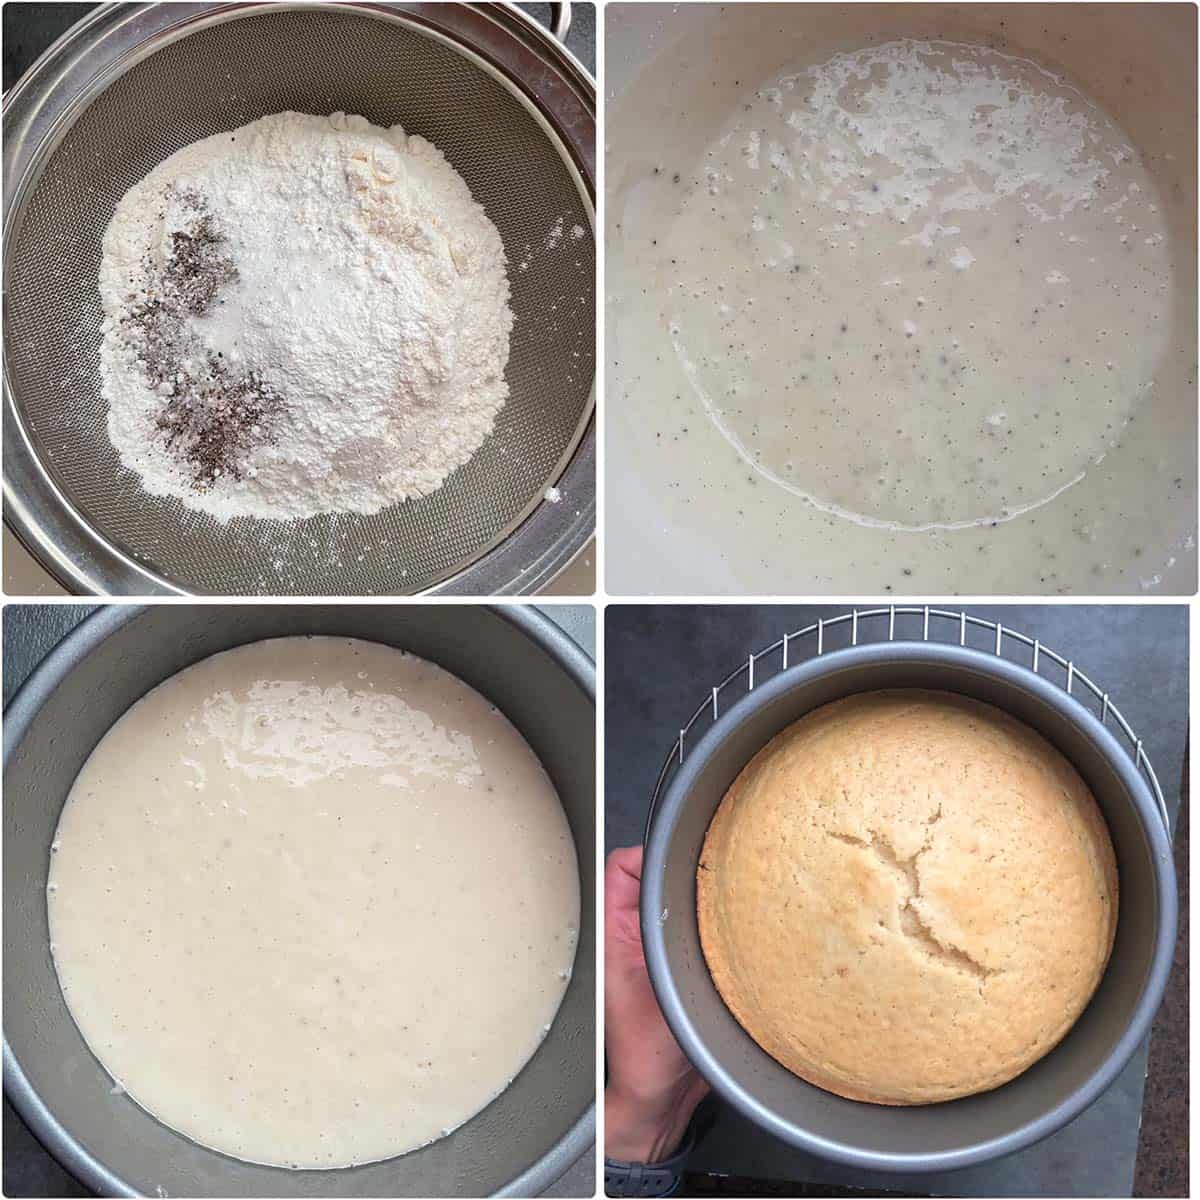 Adding dry ingredients and baked cake